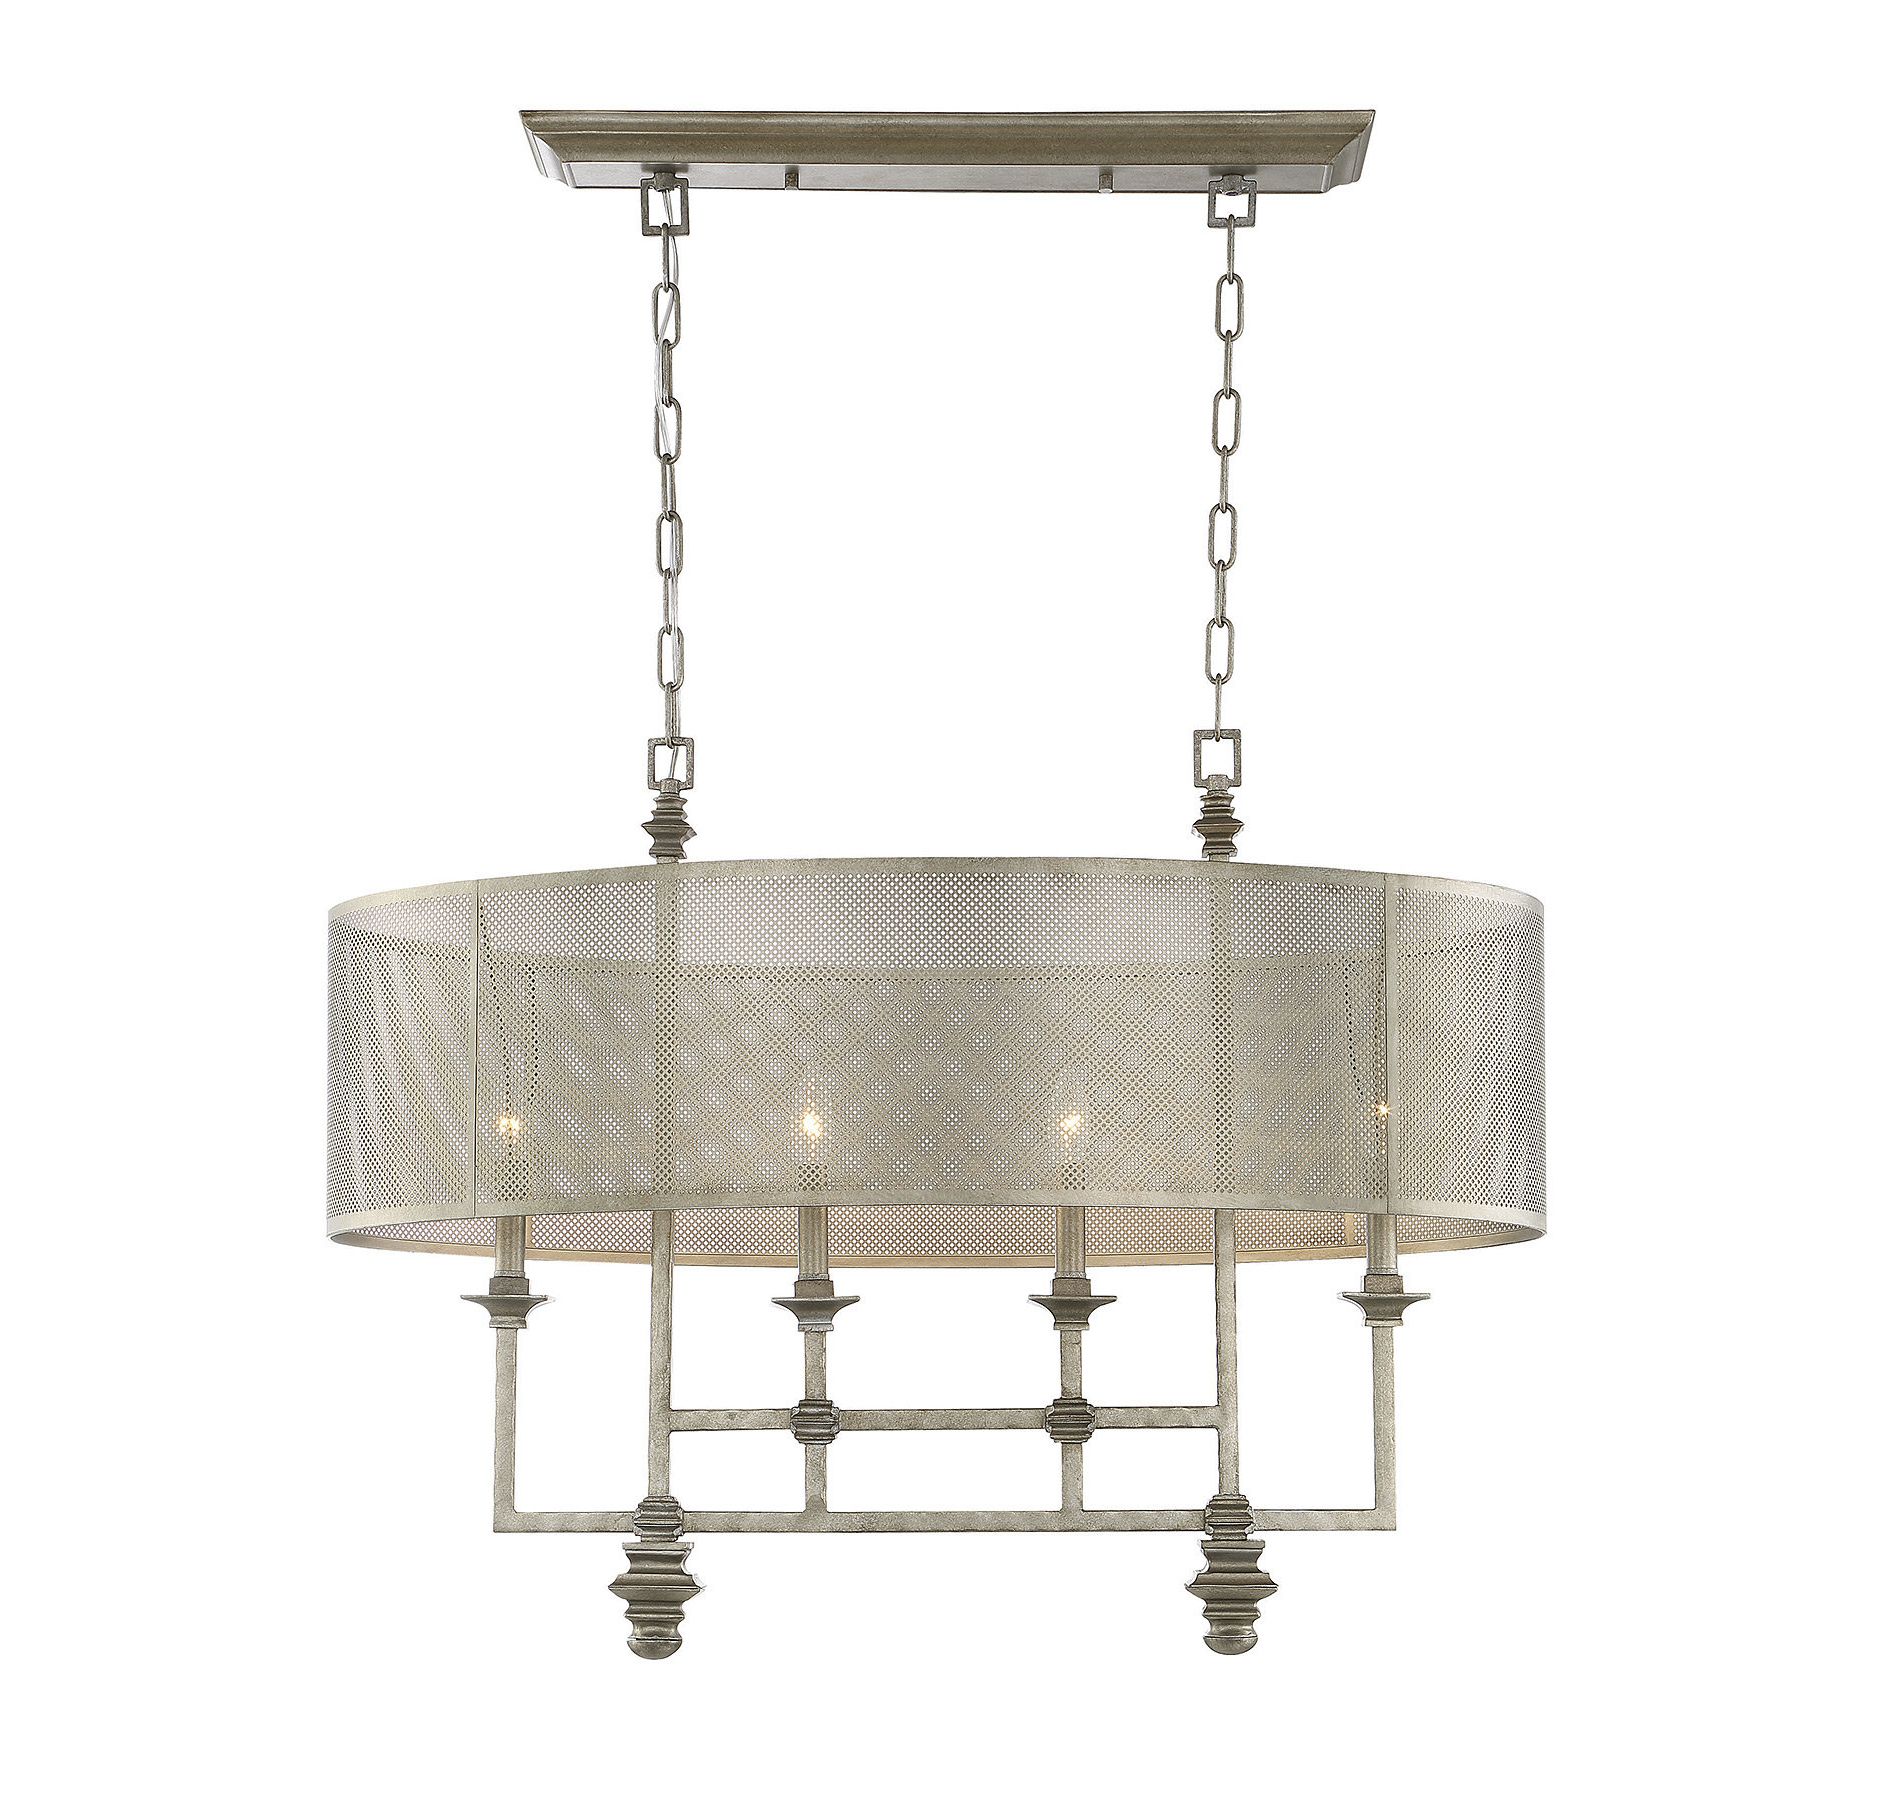 Fashionable Freeburg 4 Light Chandelier Pertaining To Lindsey 4 Light Drum Chandeliers (View 8 of 25)